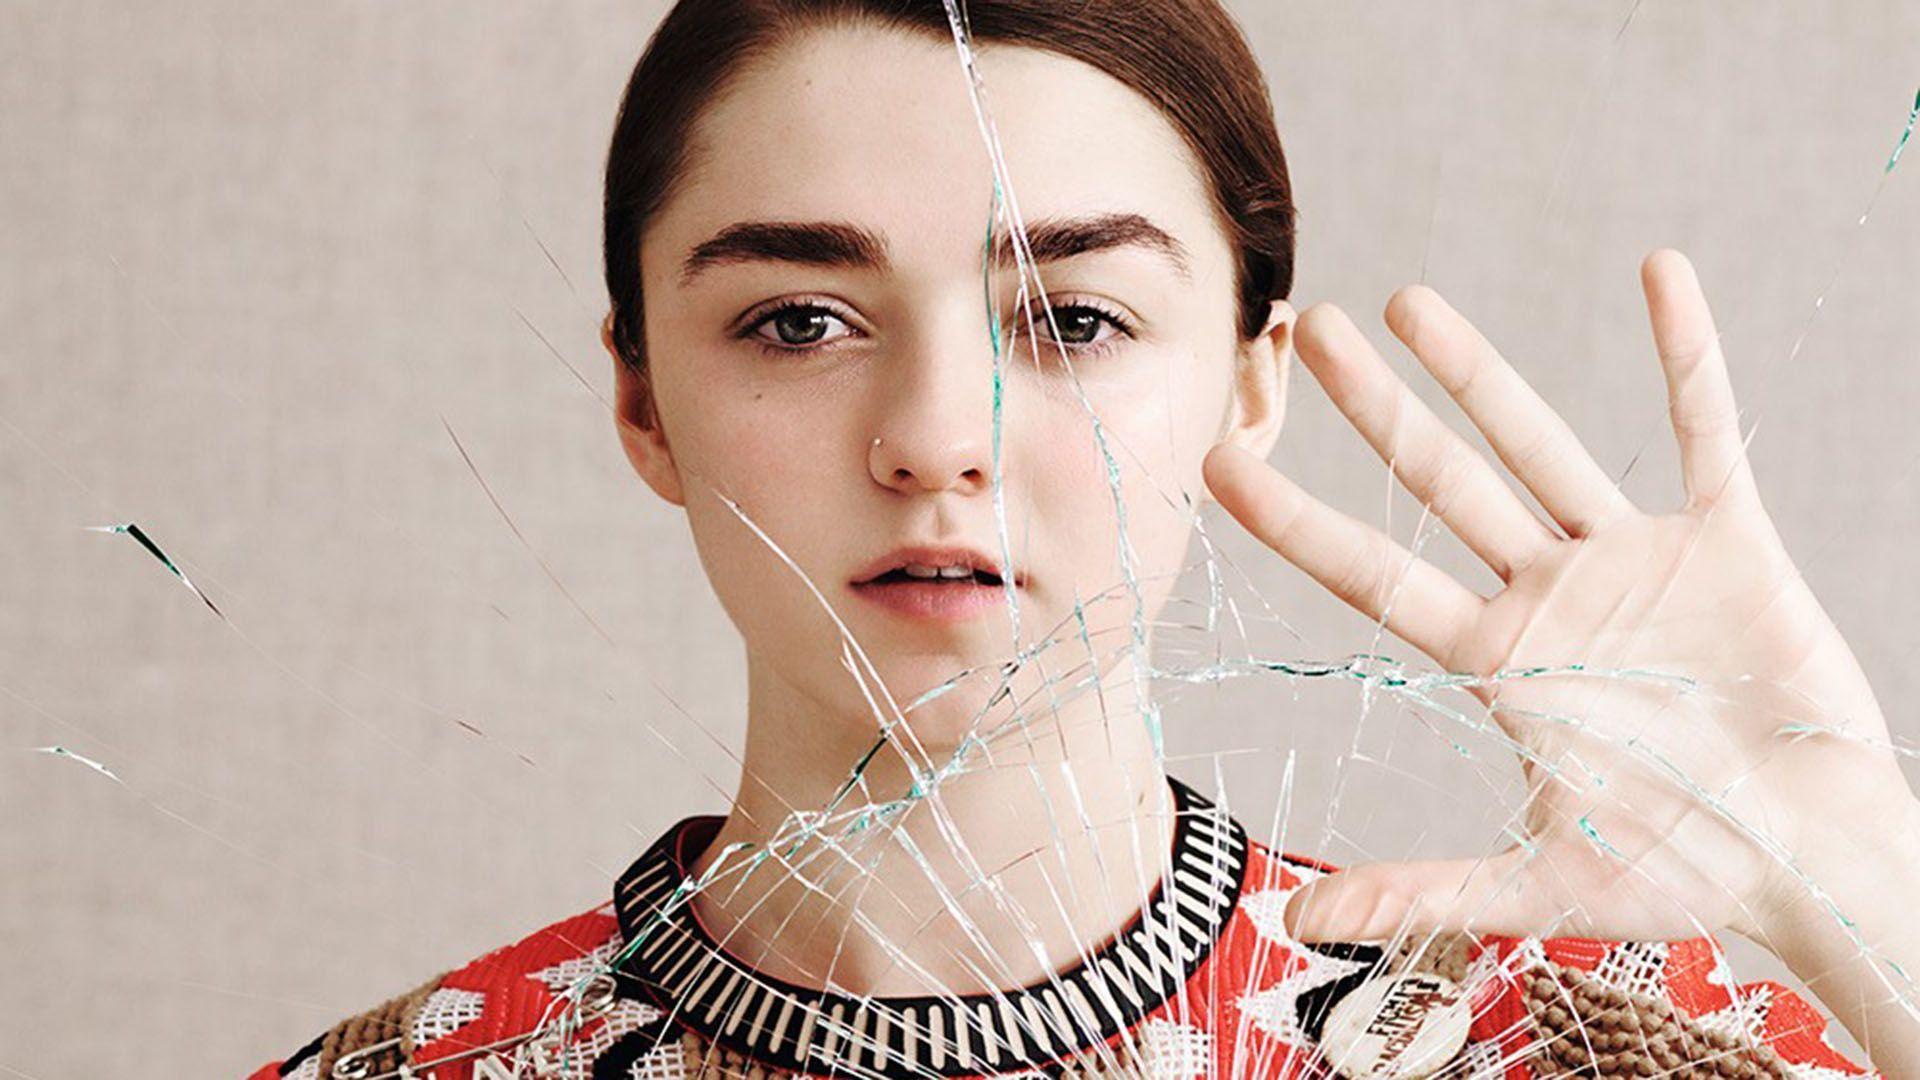 Maisie Williams Wallpaper High Resolution and Quality Download